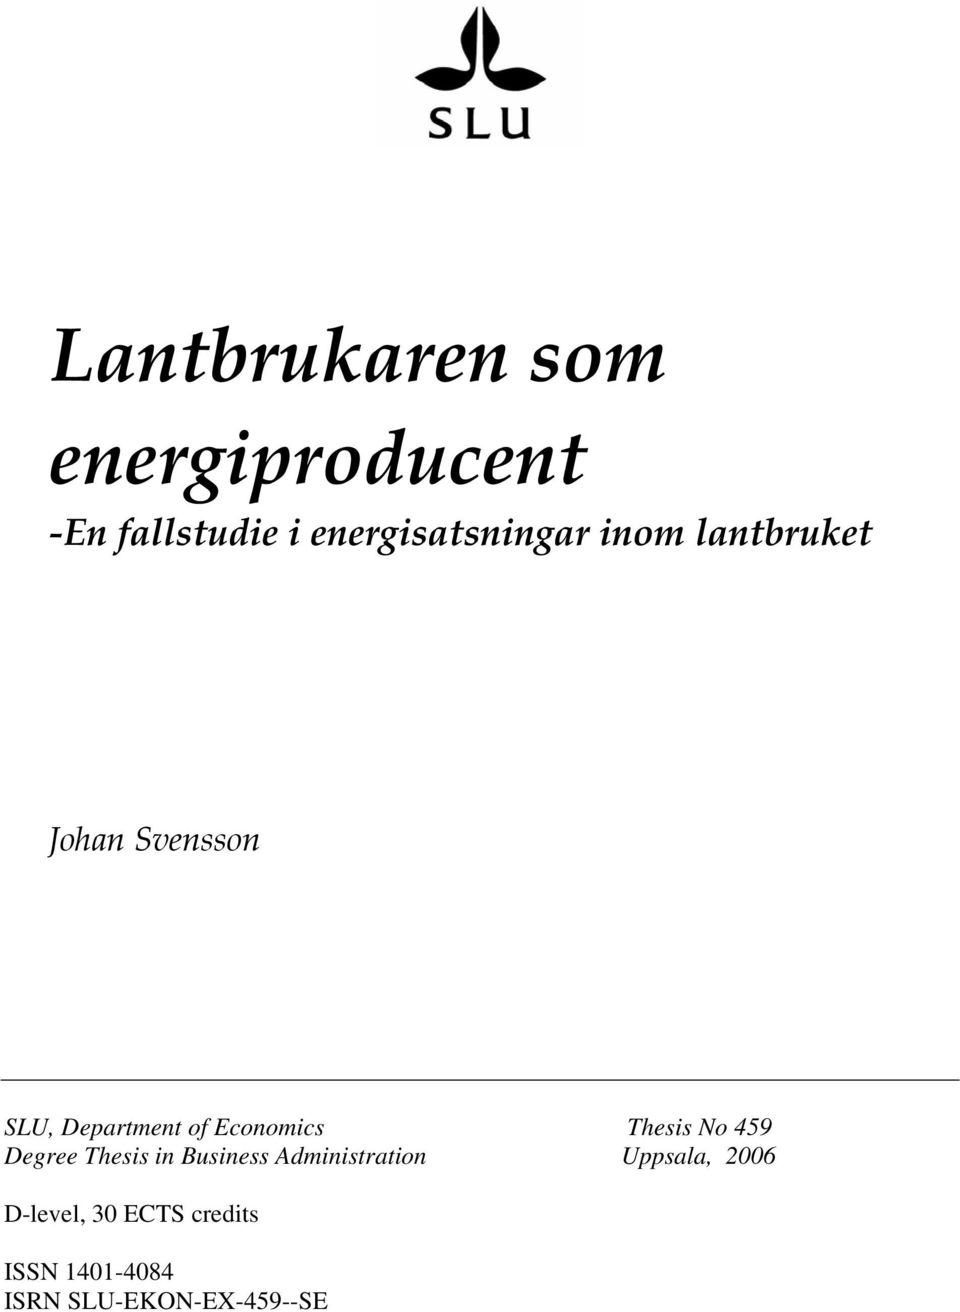 No 459 Degree Thesis in Business Administration Uppsala, 2006